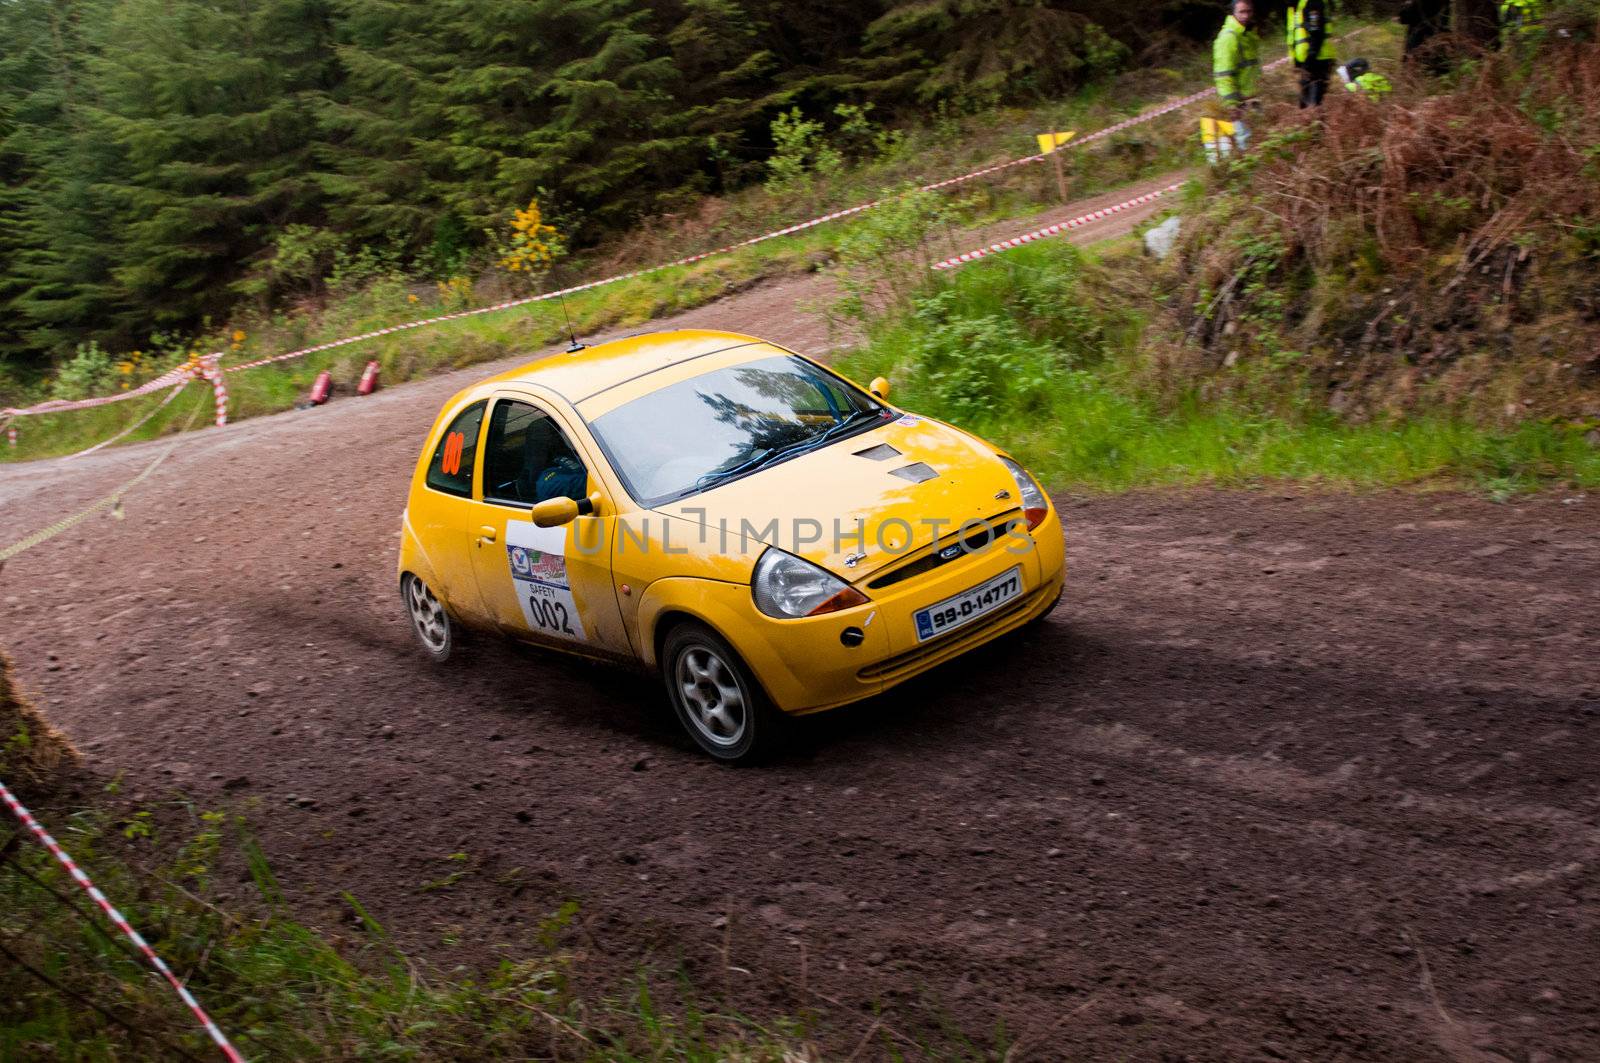 MALLOW, IRELAND - MAY 19: unidentified driver on Ford Ka at the Jim Walsh Cork Forest Rally on May 19, 2012 in Mallow, Ireland. 4th round of the Valvoline National Forest Rally Championship.